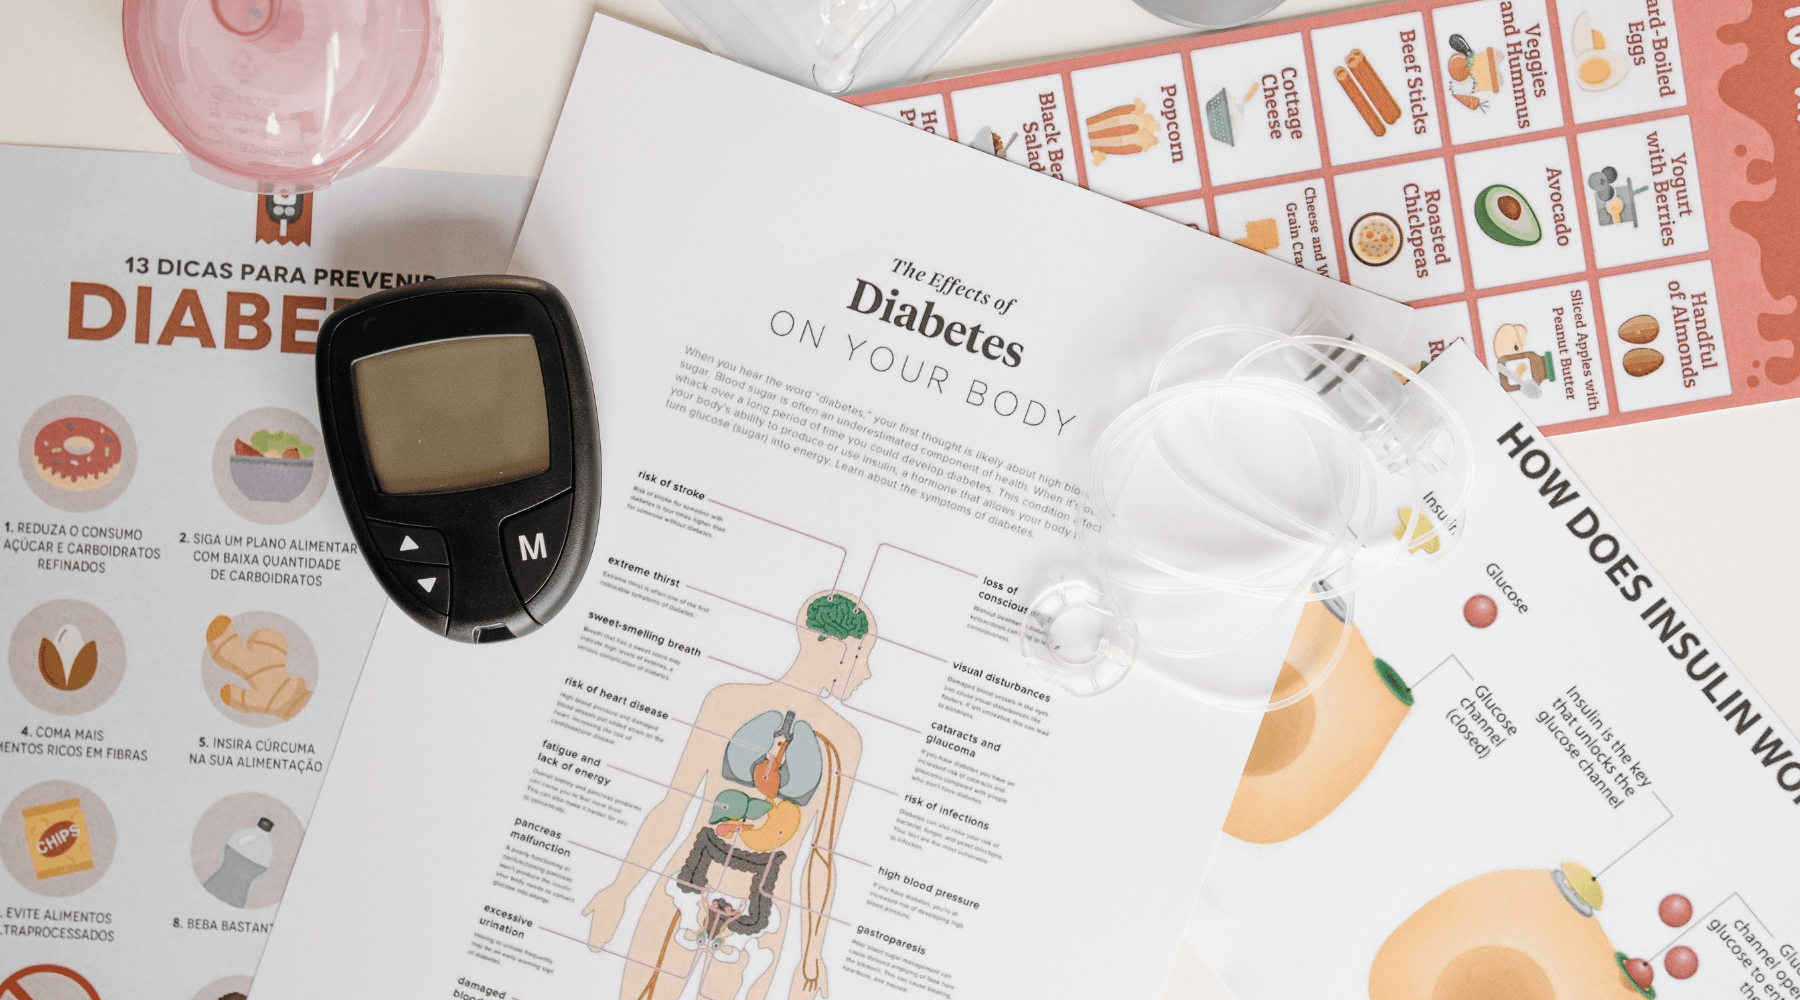 Diabetic Ulcers: Causes, Symptoms and Treatments